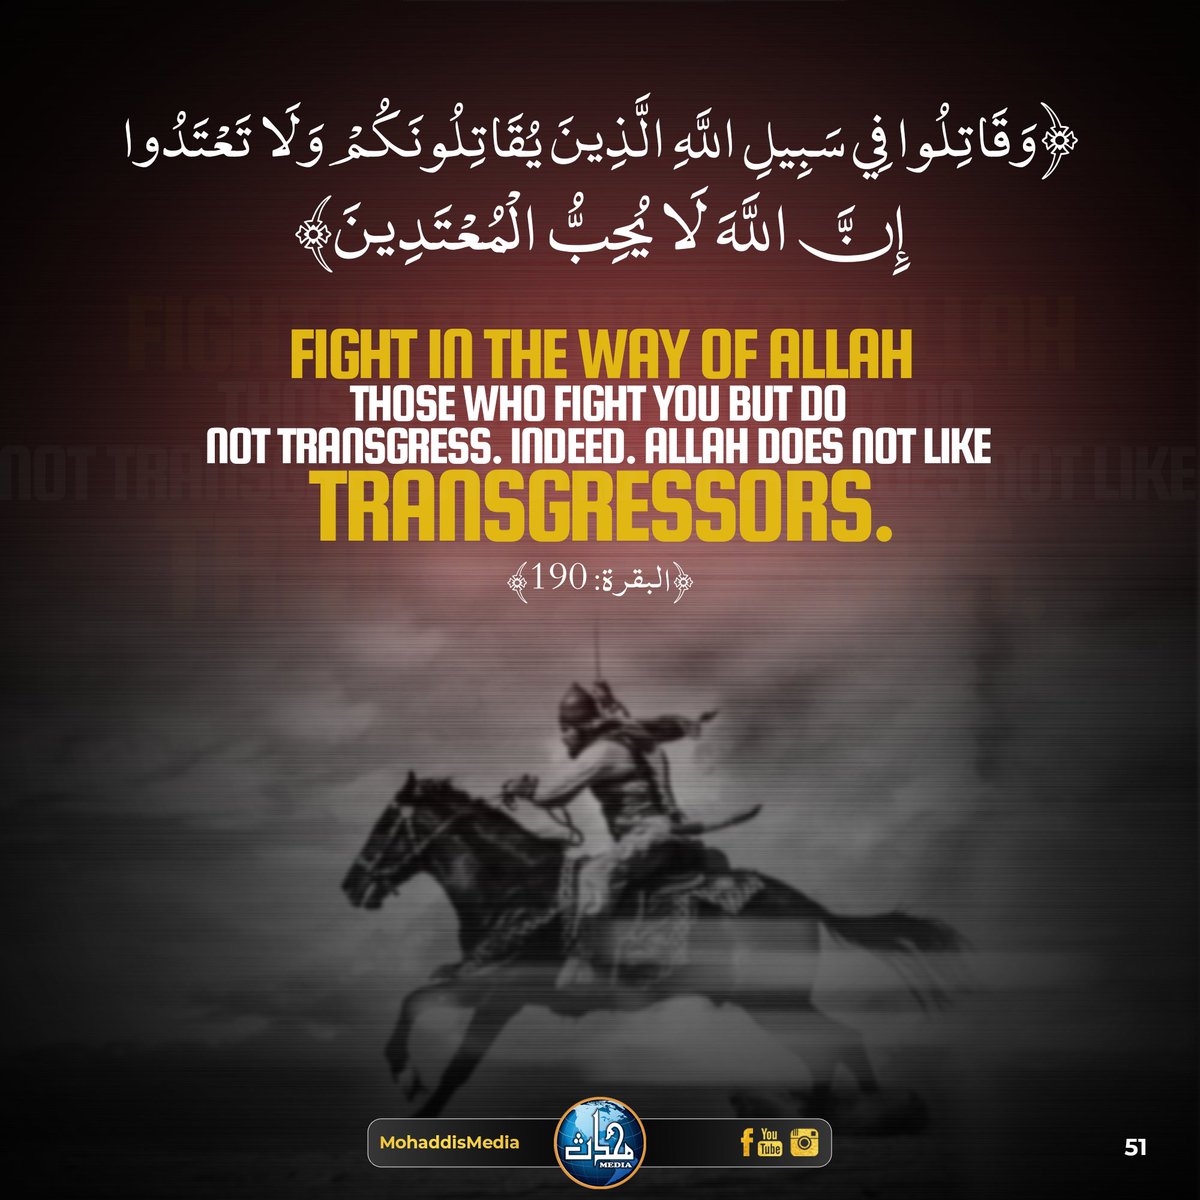 'Those who fight you, fight them'

#SelfDefense 
#JustWar 
#IslamicPrinciples 
#PeacefulResistance 
#QuranicVerse 
#Proportionality 
#JusticeInConflict 
#RespectForLimits 
#AllahsGuidance